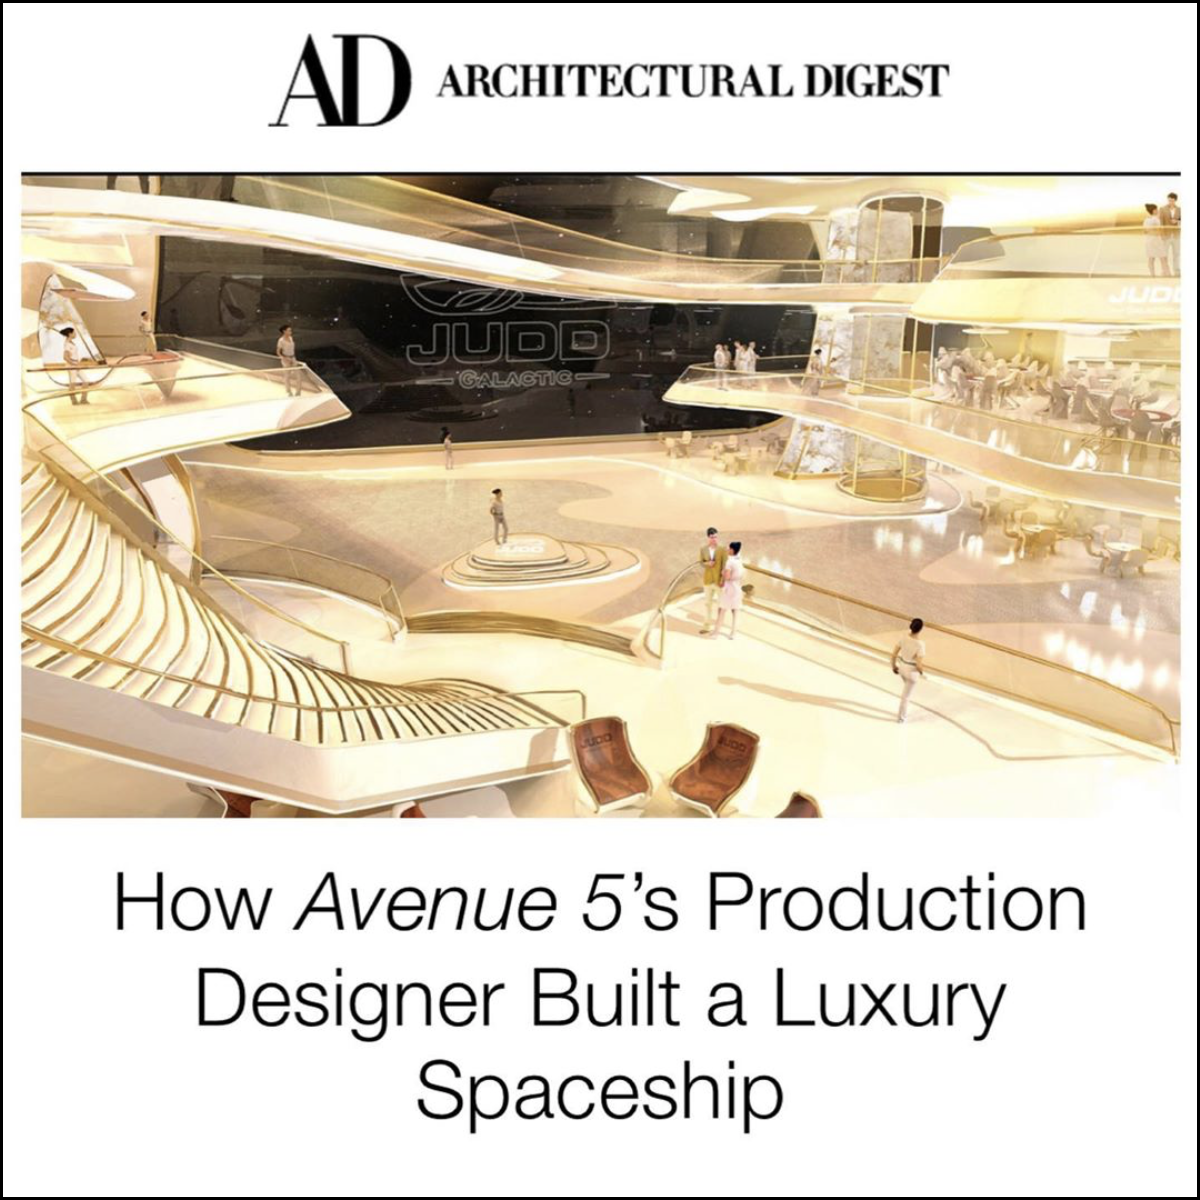 INTERVIEW IN ARCHITECTURAL DIGEST (CLICK TO READ)